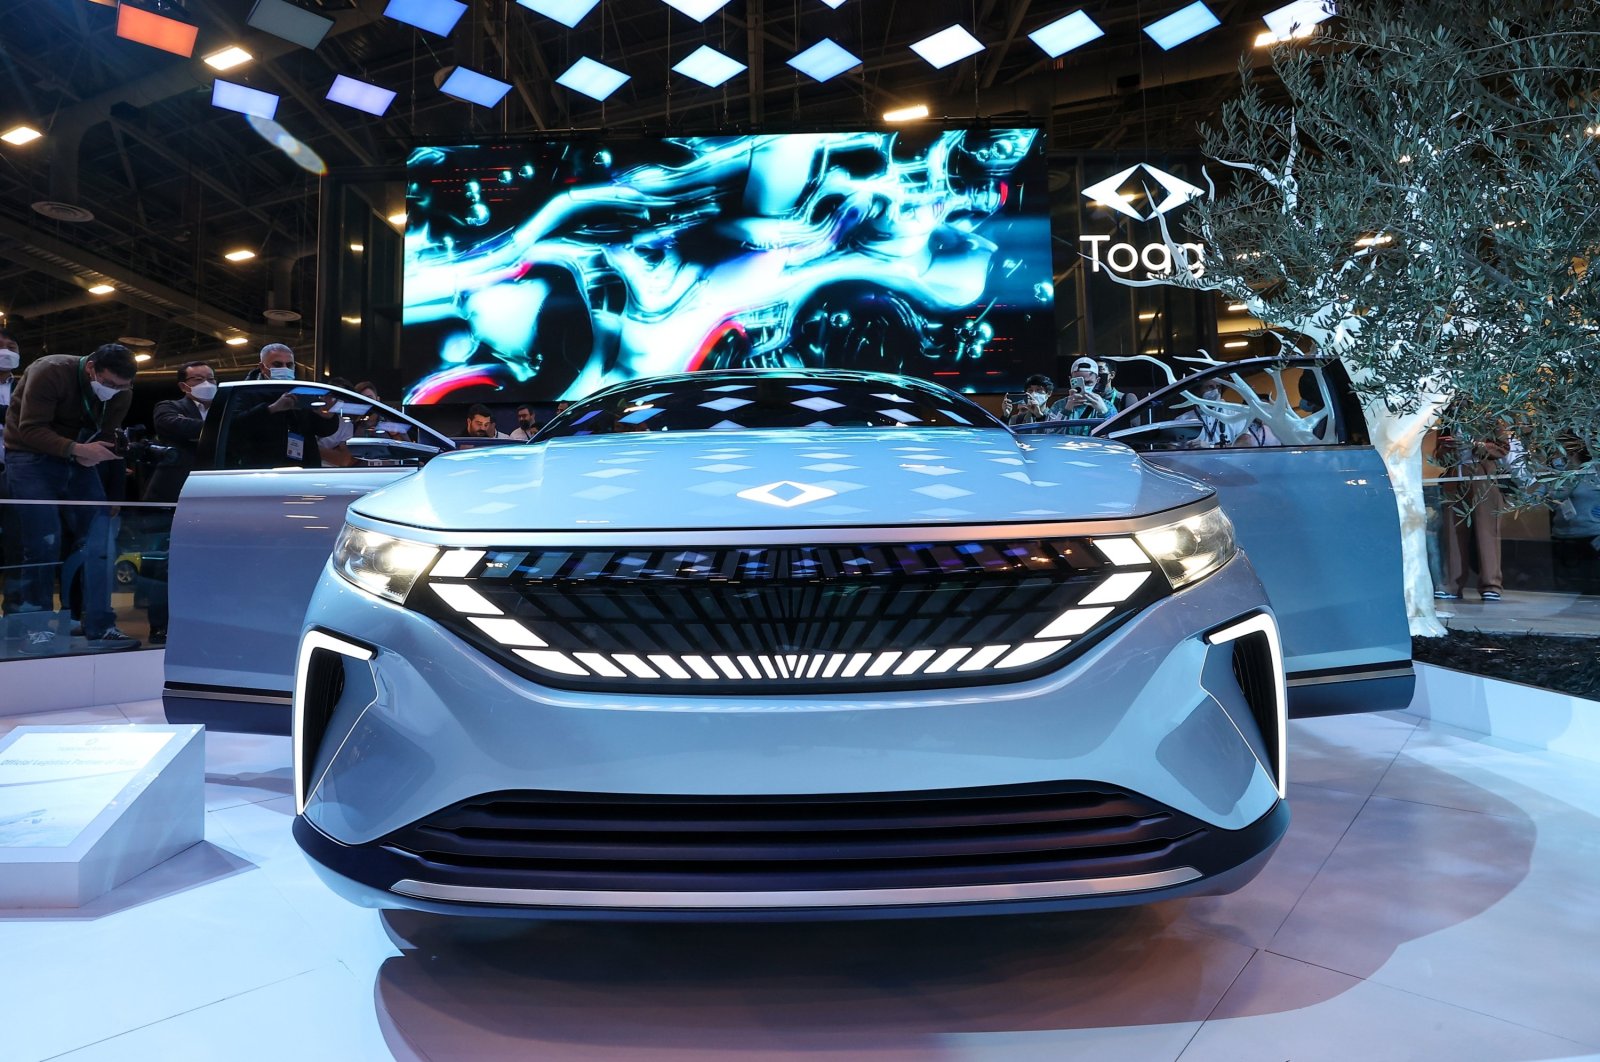 Togg&#039;s &quot;Transition Concept&quot; electric vehicle after its unveiling during CES 2022 at the Las Vegas Convention Center in Las Vegas, Nevada, U.S., Jan. 5, 2022. (AA Photo)